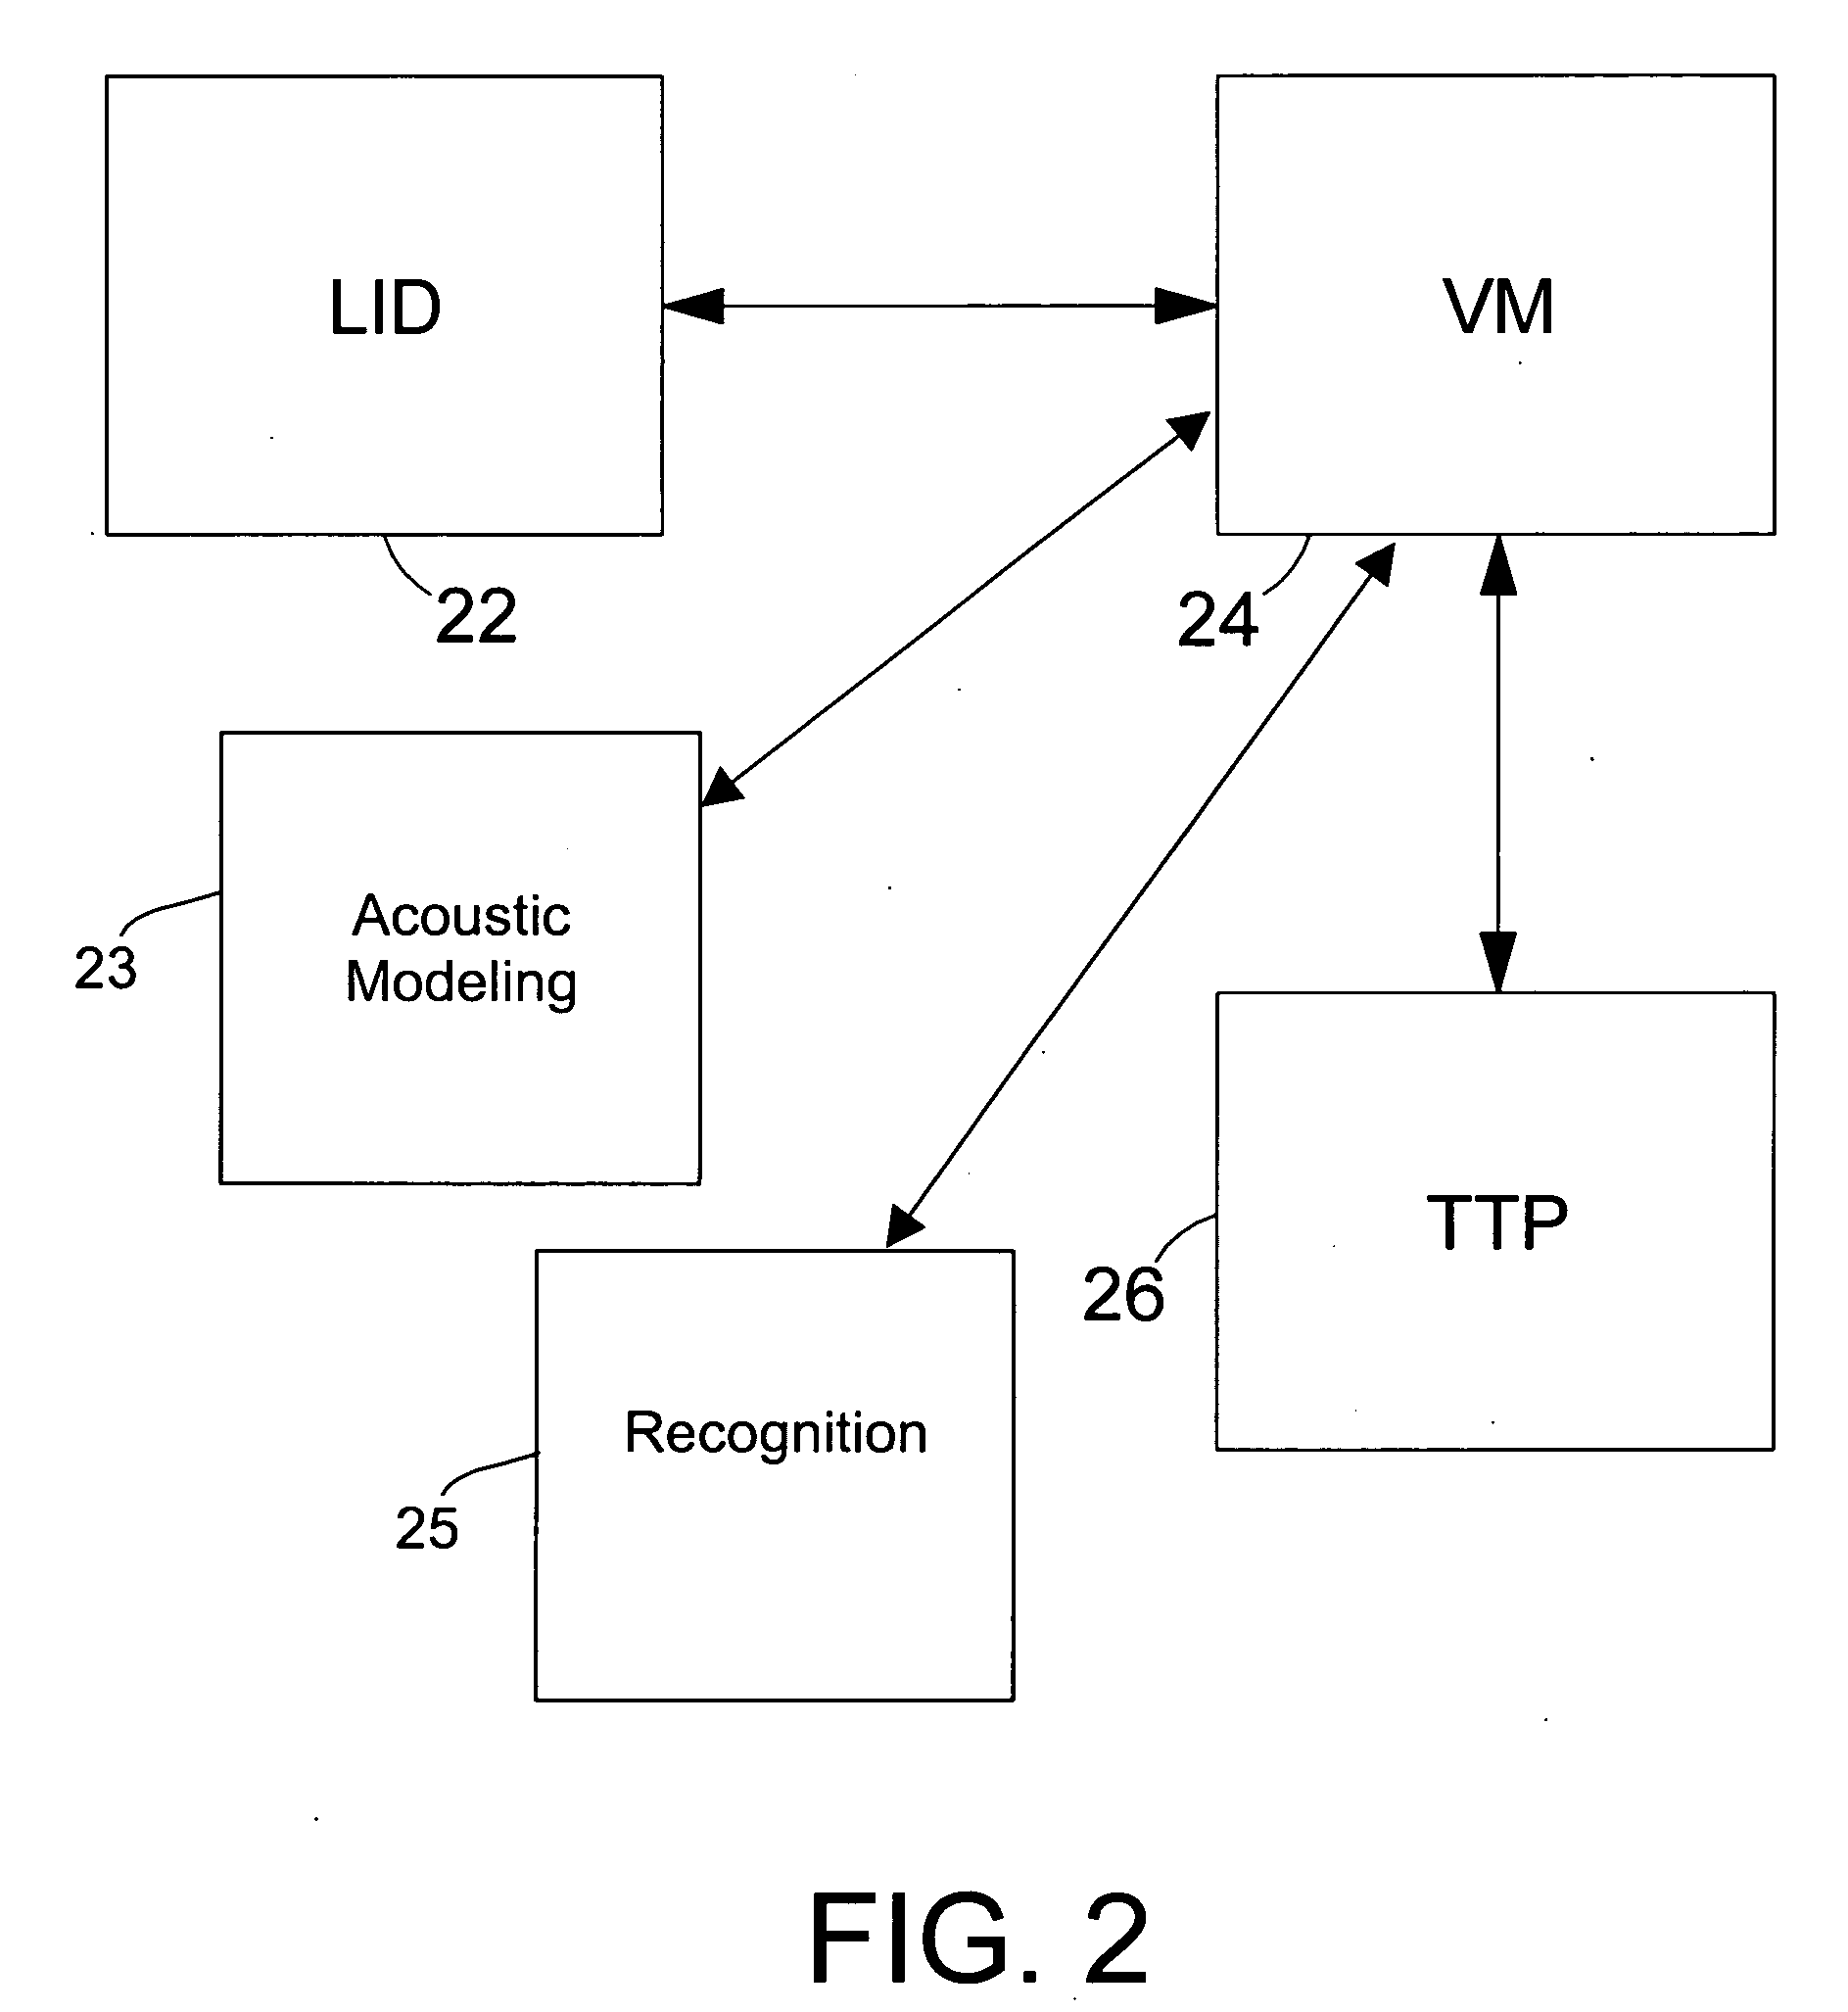 Handling of acronyms and digits in a speech recognition and text-to-speech engine